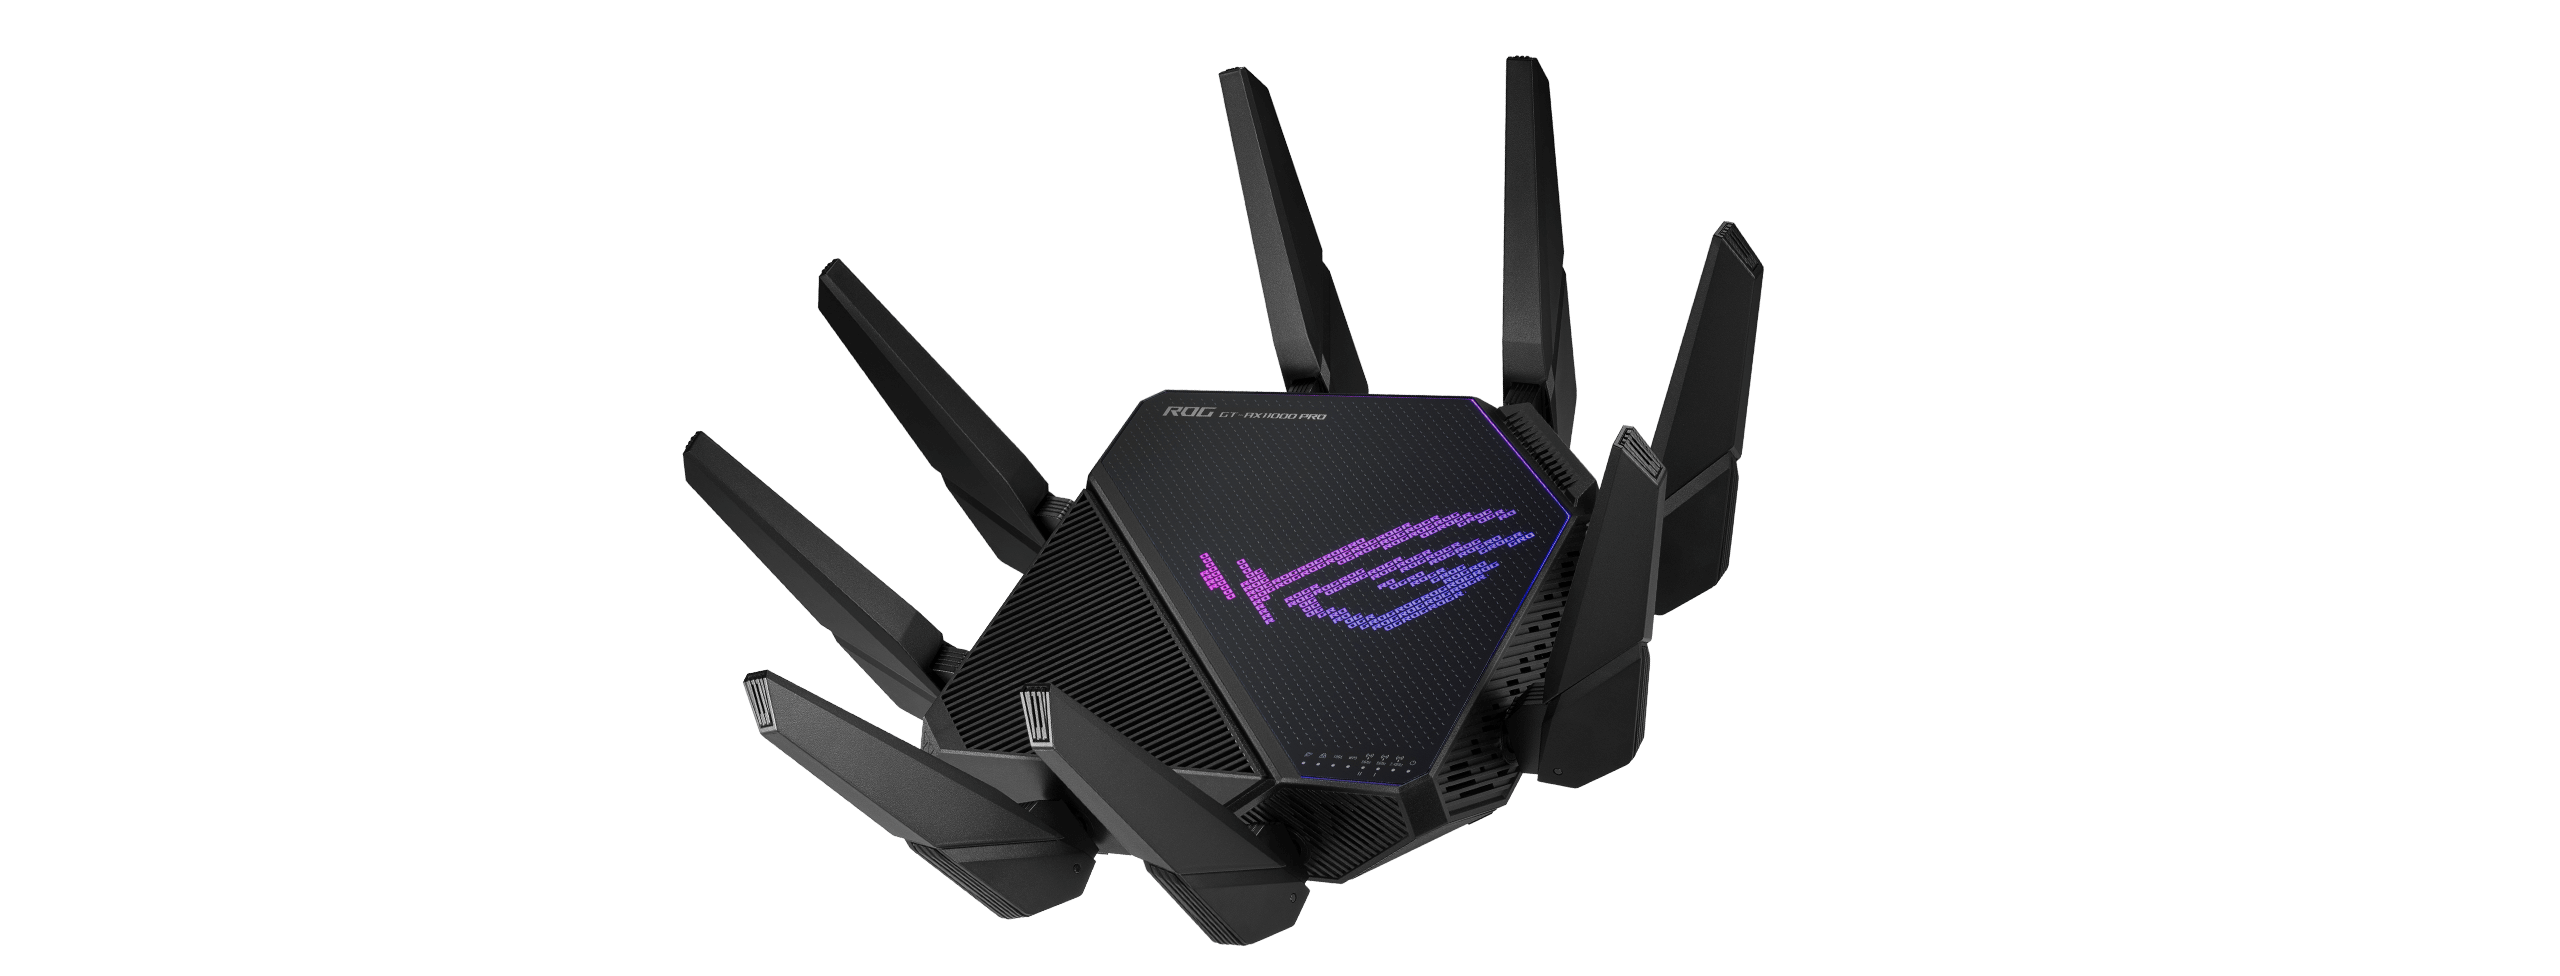 Router Wi-Fi 6 AX11000 ASUS ROG Rapture GT-AX11000 PRO